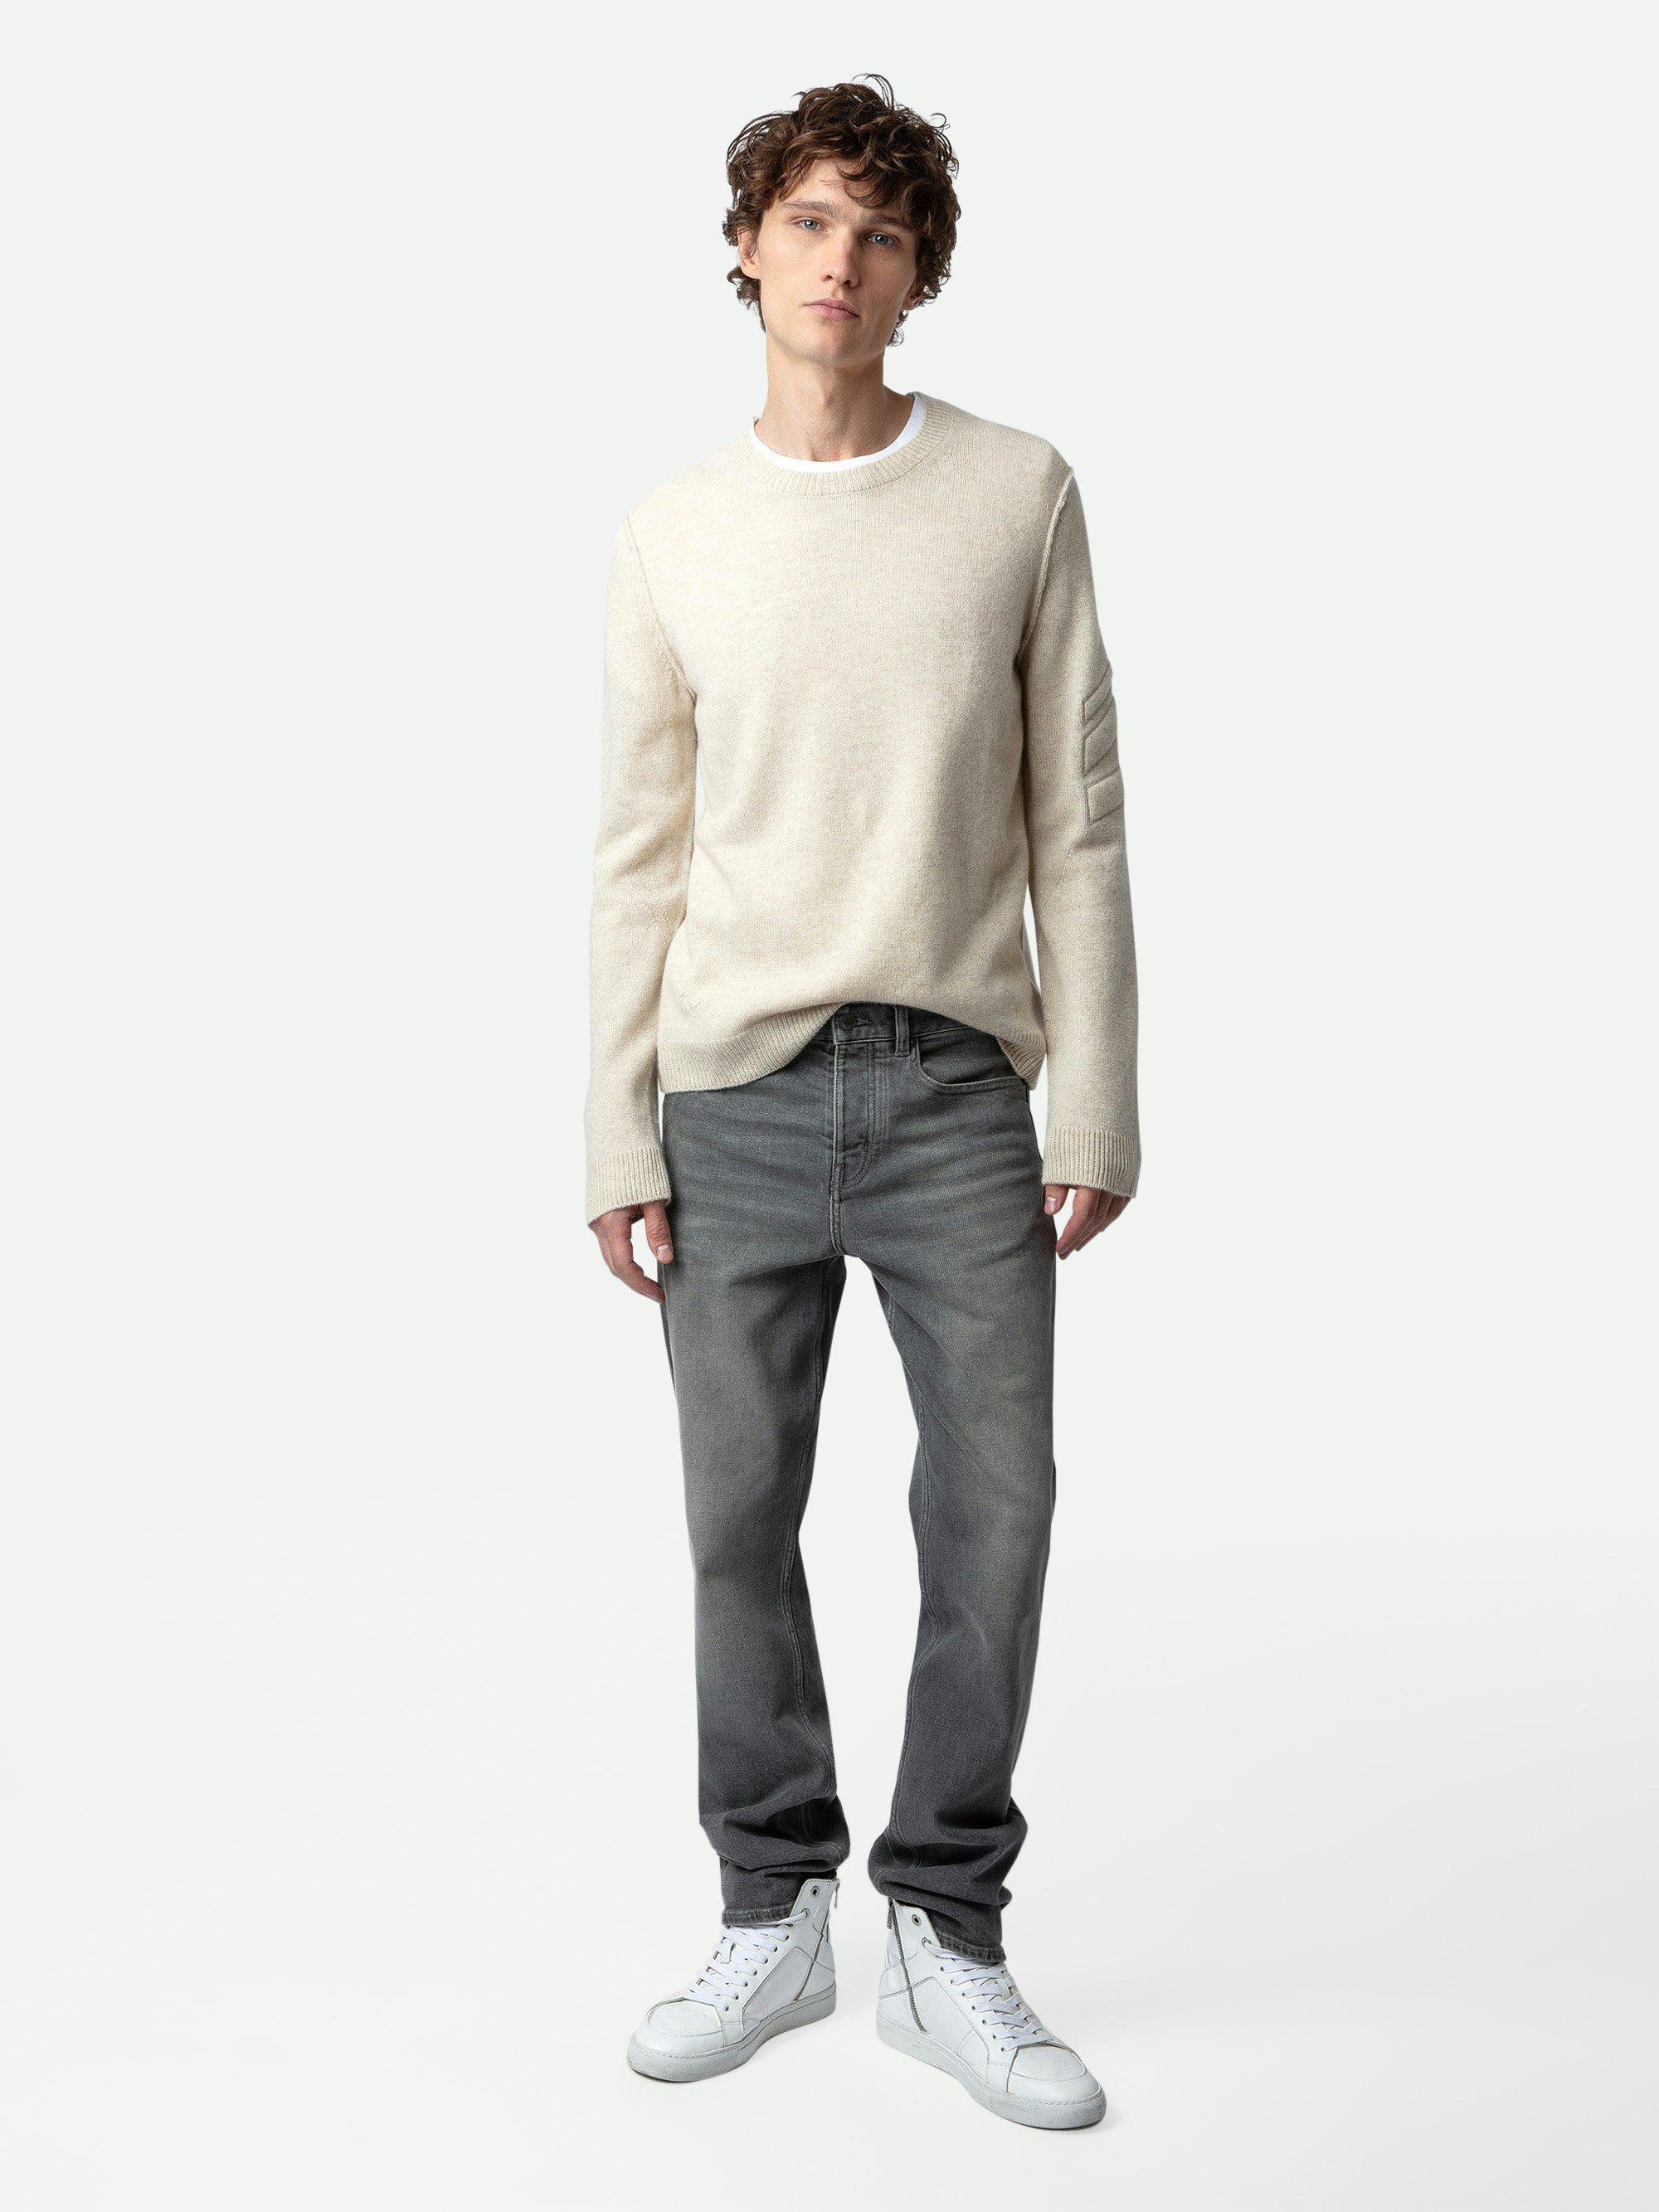 Kennedy Cashmere Sweater - Ecru cashmere round-neck sweater with arrows on the left sleeve.